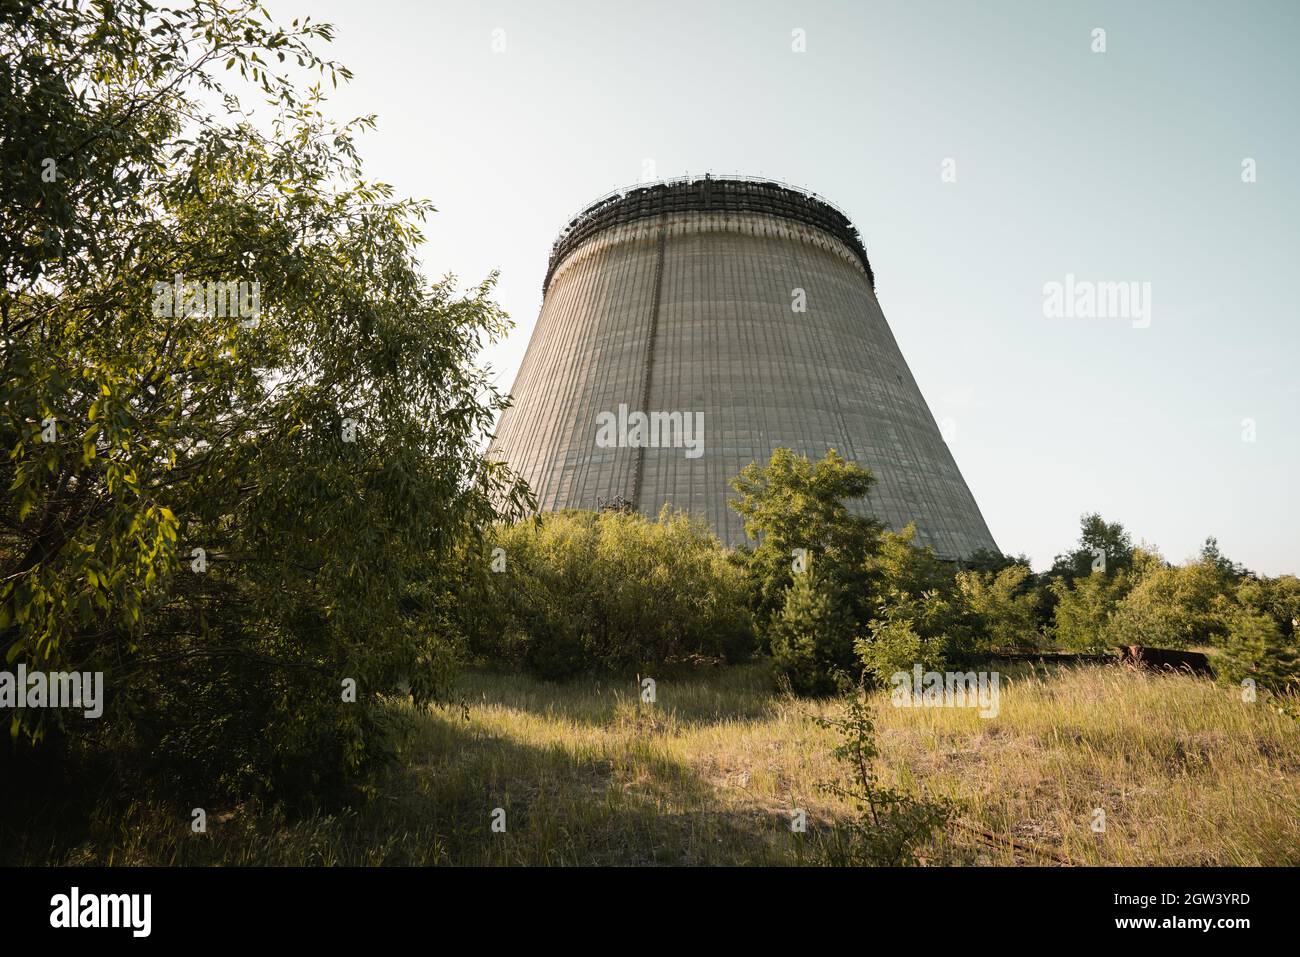 Unfinished Cooling Tower of Chernobyl Nuclear Power Plant - Chernobyl Exclusion Zone, Ukraine Stock Photo